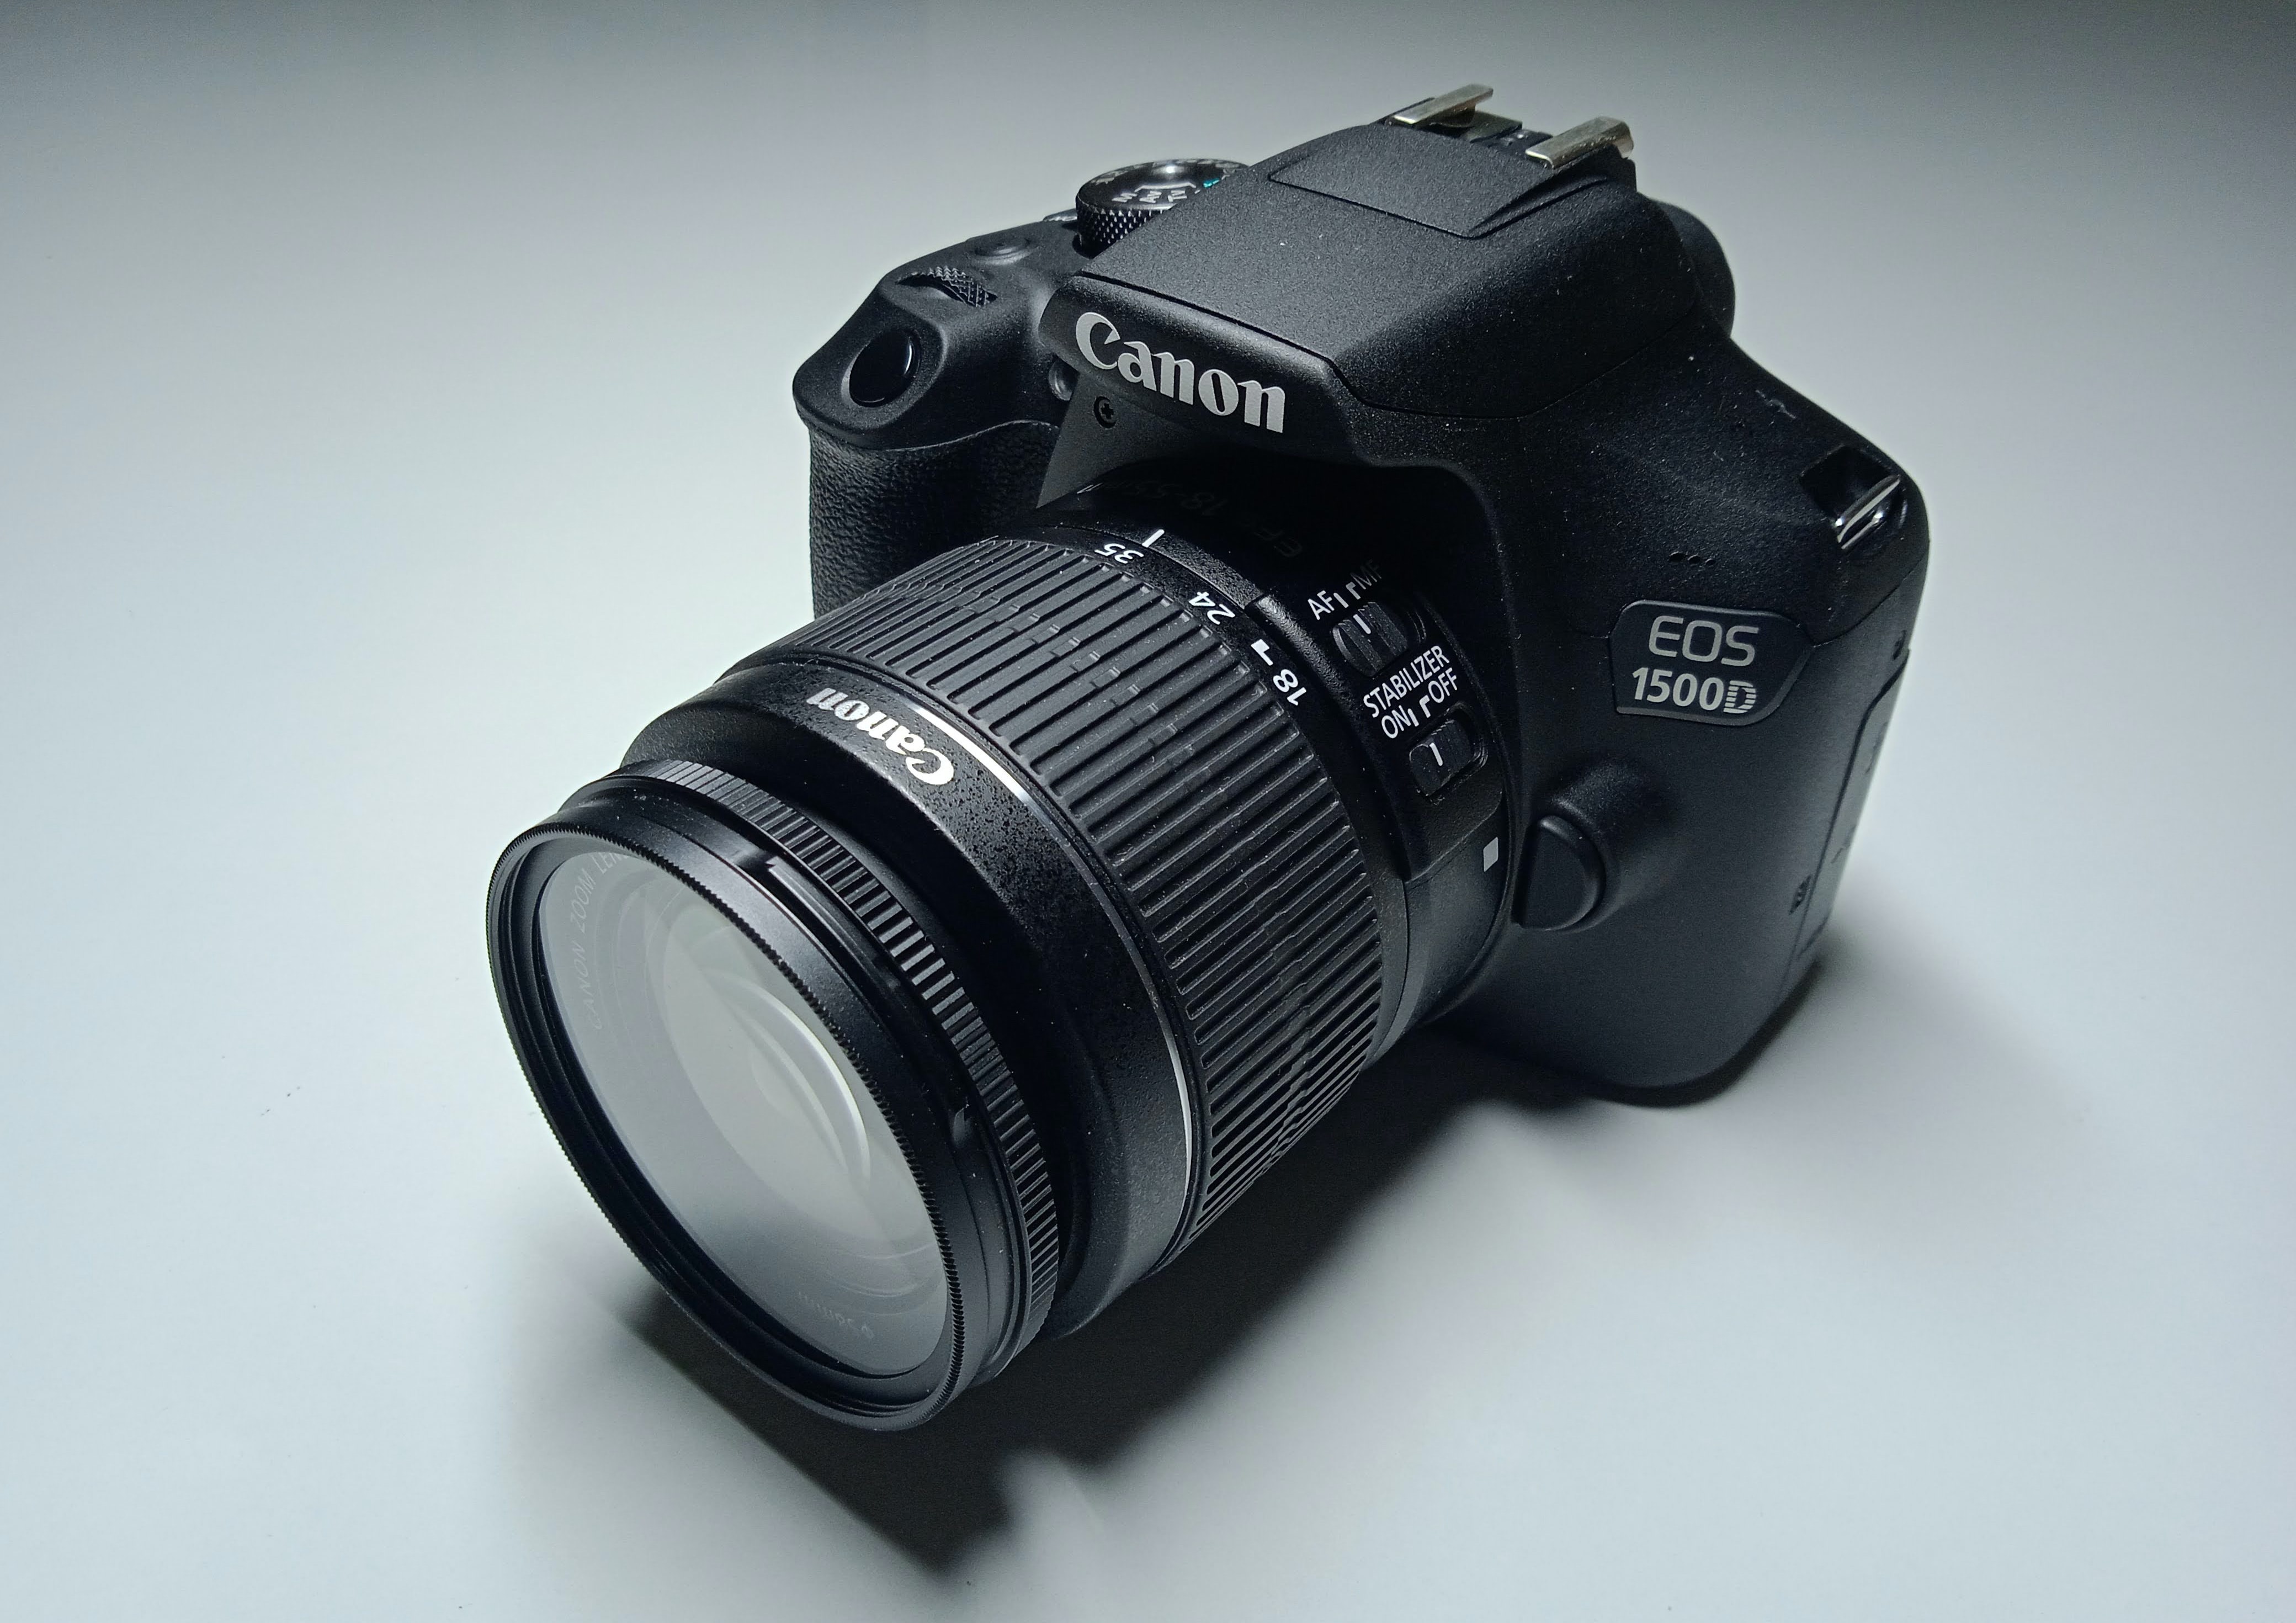 Picture of Camera Canon EOS 1300D